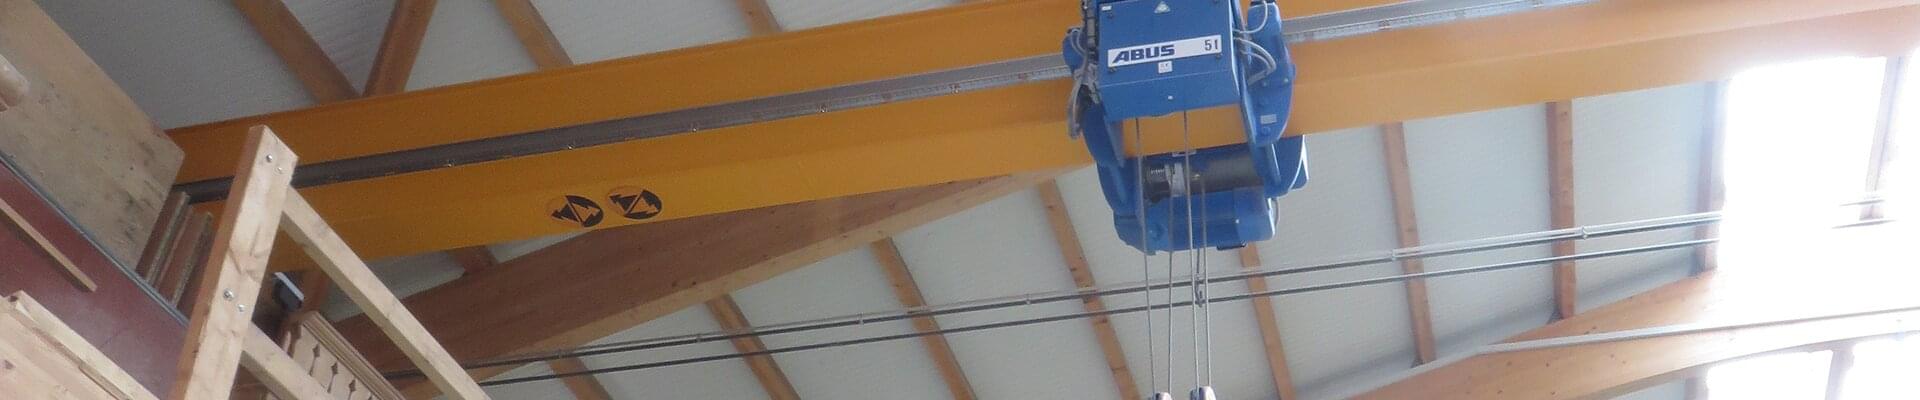 ABUS cranes active in companies for a wide range of woodwork in Switzerland